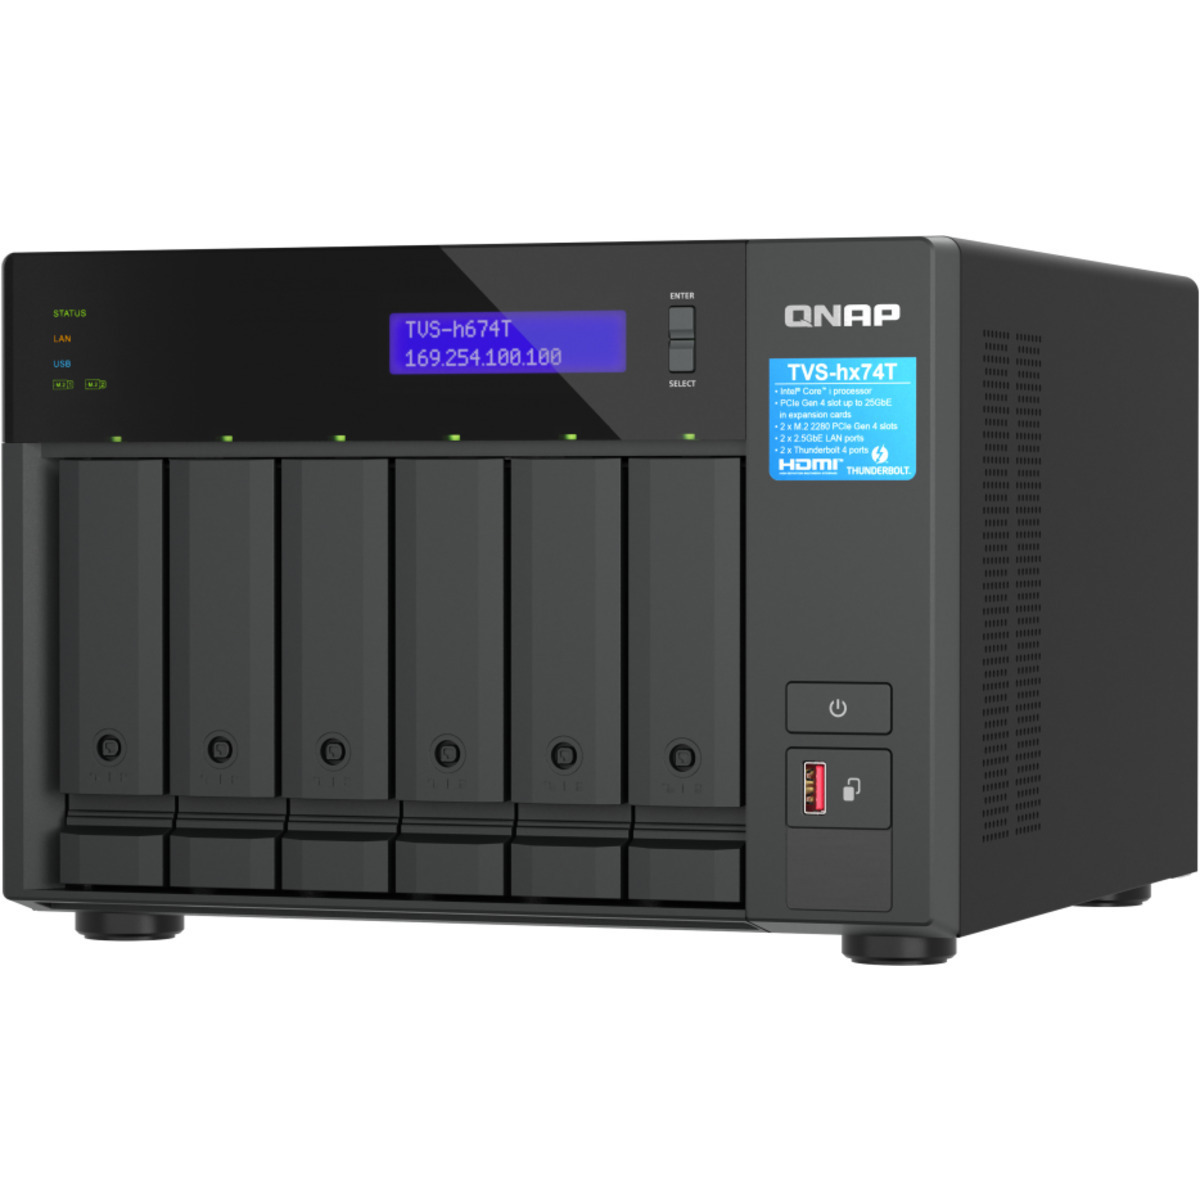 buy QNAP TVS-h674T Core i5 Thunderbolt 4 132tb Desktop DAS-NAS - Combo Direct + Network Storage Device 6x22000gb Western Digital Red Pro WD221KFGX 3.5 7200rpm SATA 6Gb/s HDD NAS Class Drives Installed - Burn-In Tested - nas headquarters buy network attached storage server device das new raid-5 free shipping usa spring sale TVS-h674T Core i5 Thunderbolt 4